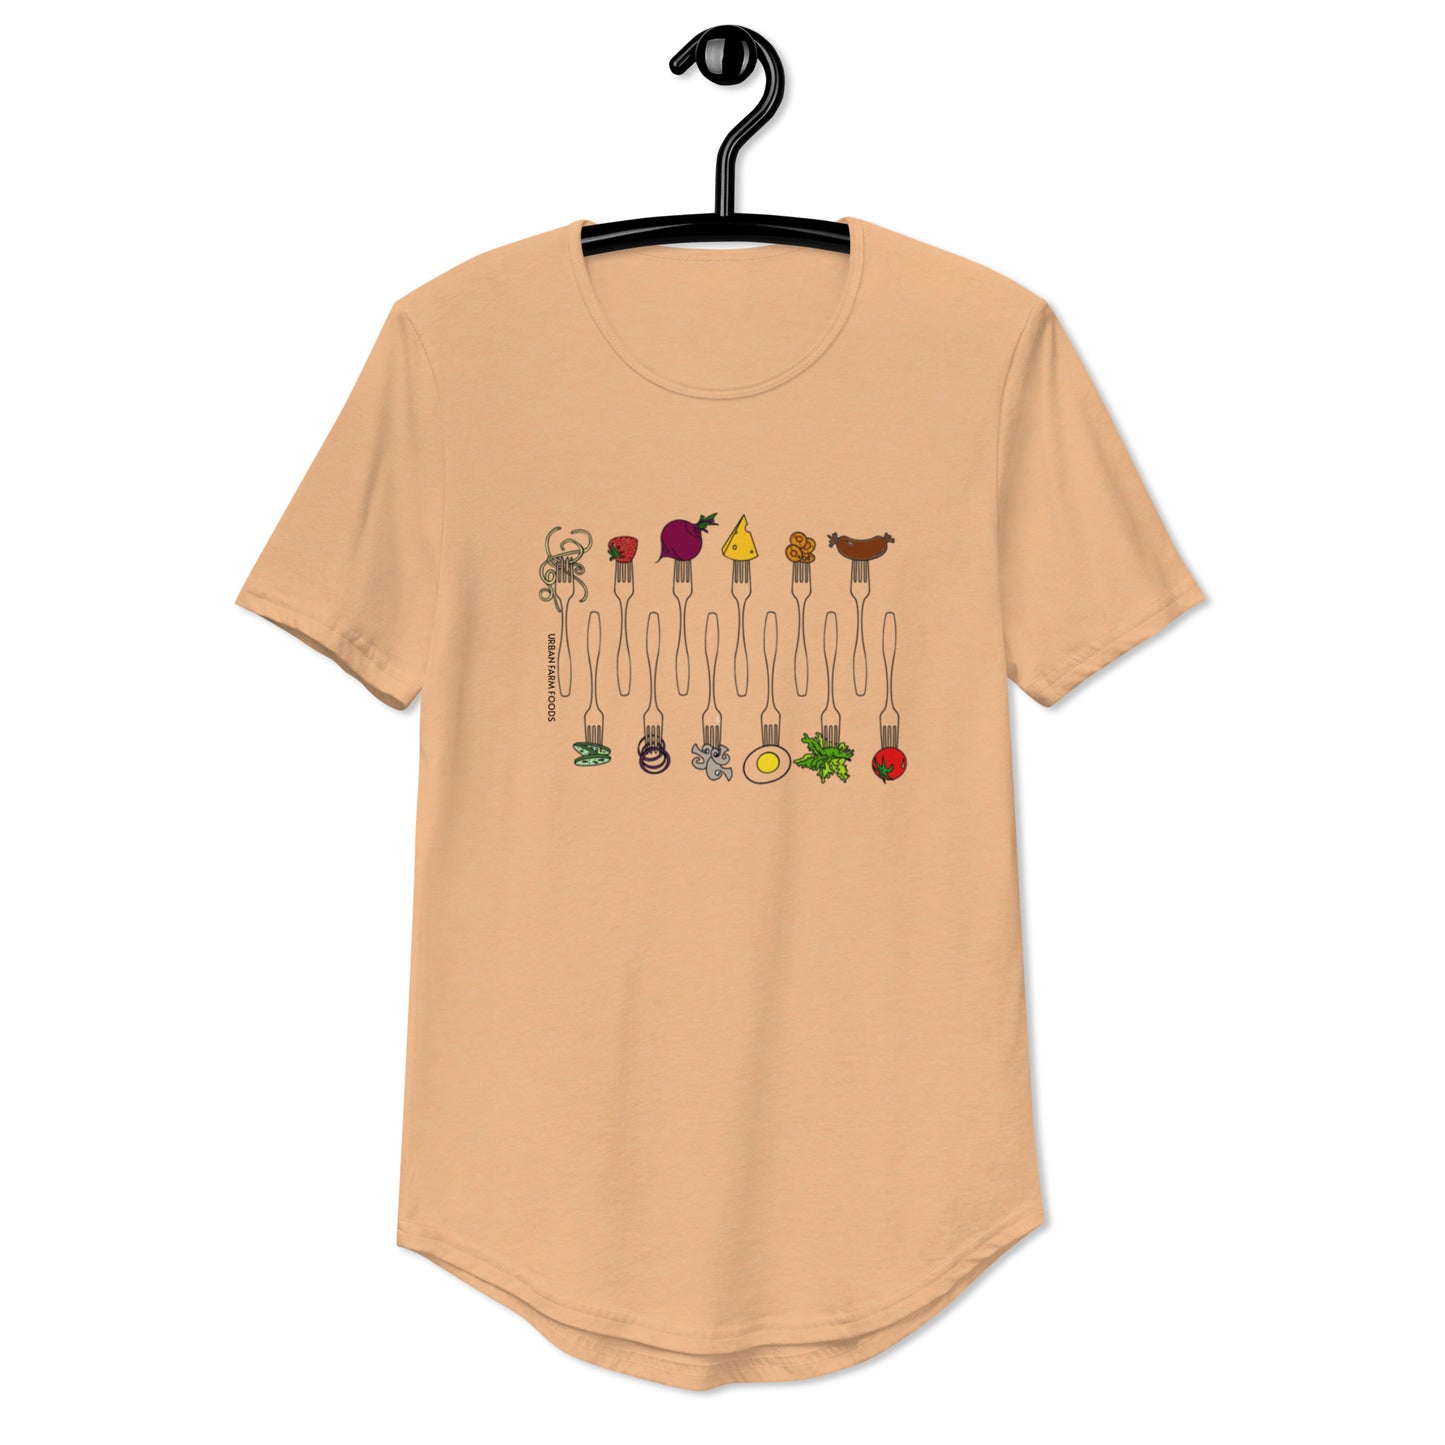 Forked Up T-Shirt